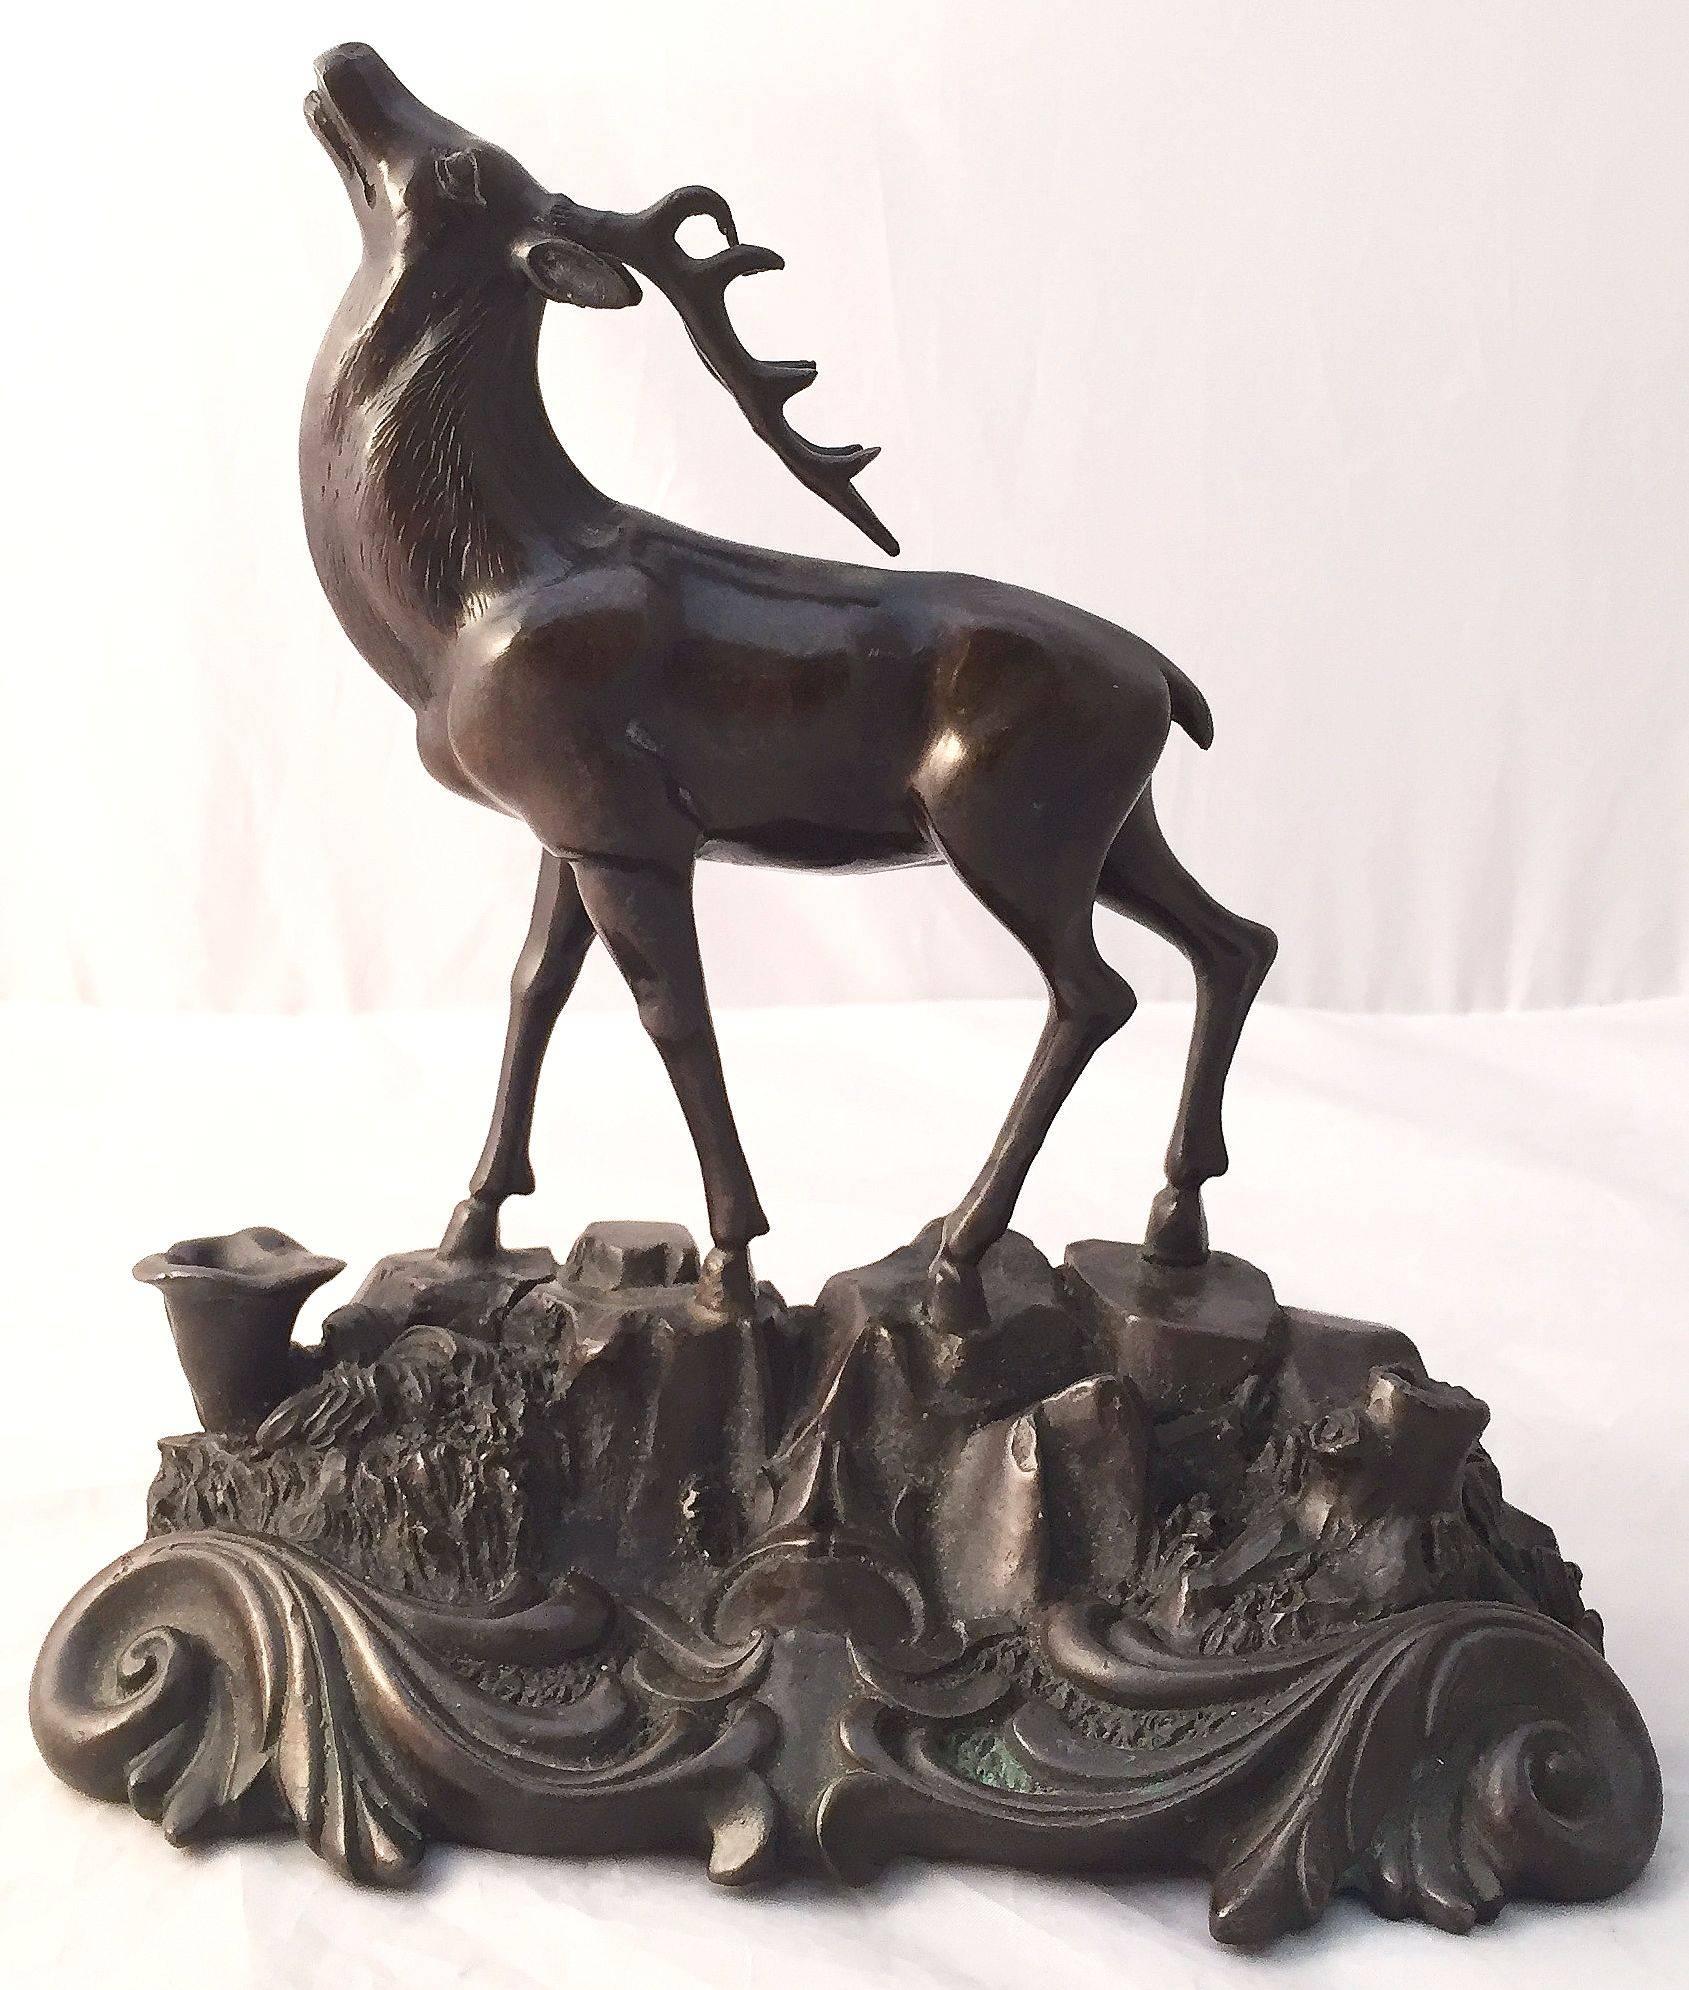 A fine French bronze statue of a deer or stag featuring fine modeling in the round, on scroll-work base.